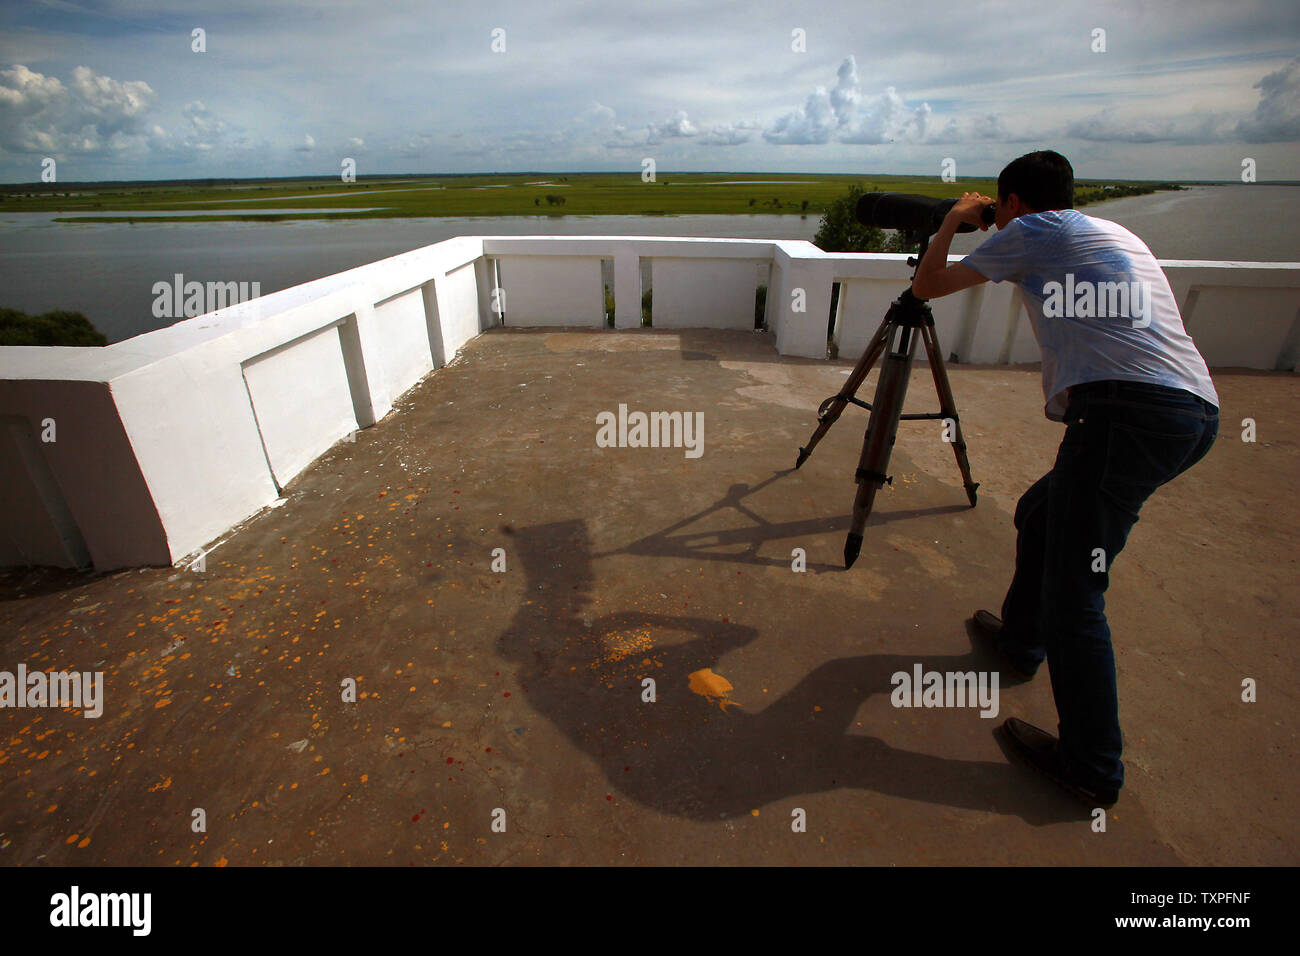 A Chinese tourist looks for wildlife in the massive Three Rivers Nature Reserve, the largest wetlands in China, in Fuyuan, a frontier town in China's northern Heilongjiang Province on August 4, 2013.  Ecotourism has been part of household vocabularies in China for a decade, however experts believe that the concept still has a long way to go in China.  Most domestic tourists are more interested in sightseeing than promoting environmental programs and awareness, according to a study.     UPI/Stephen Shaver Stock Photo